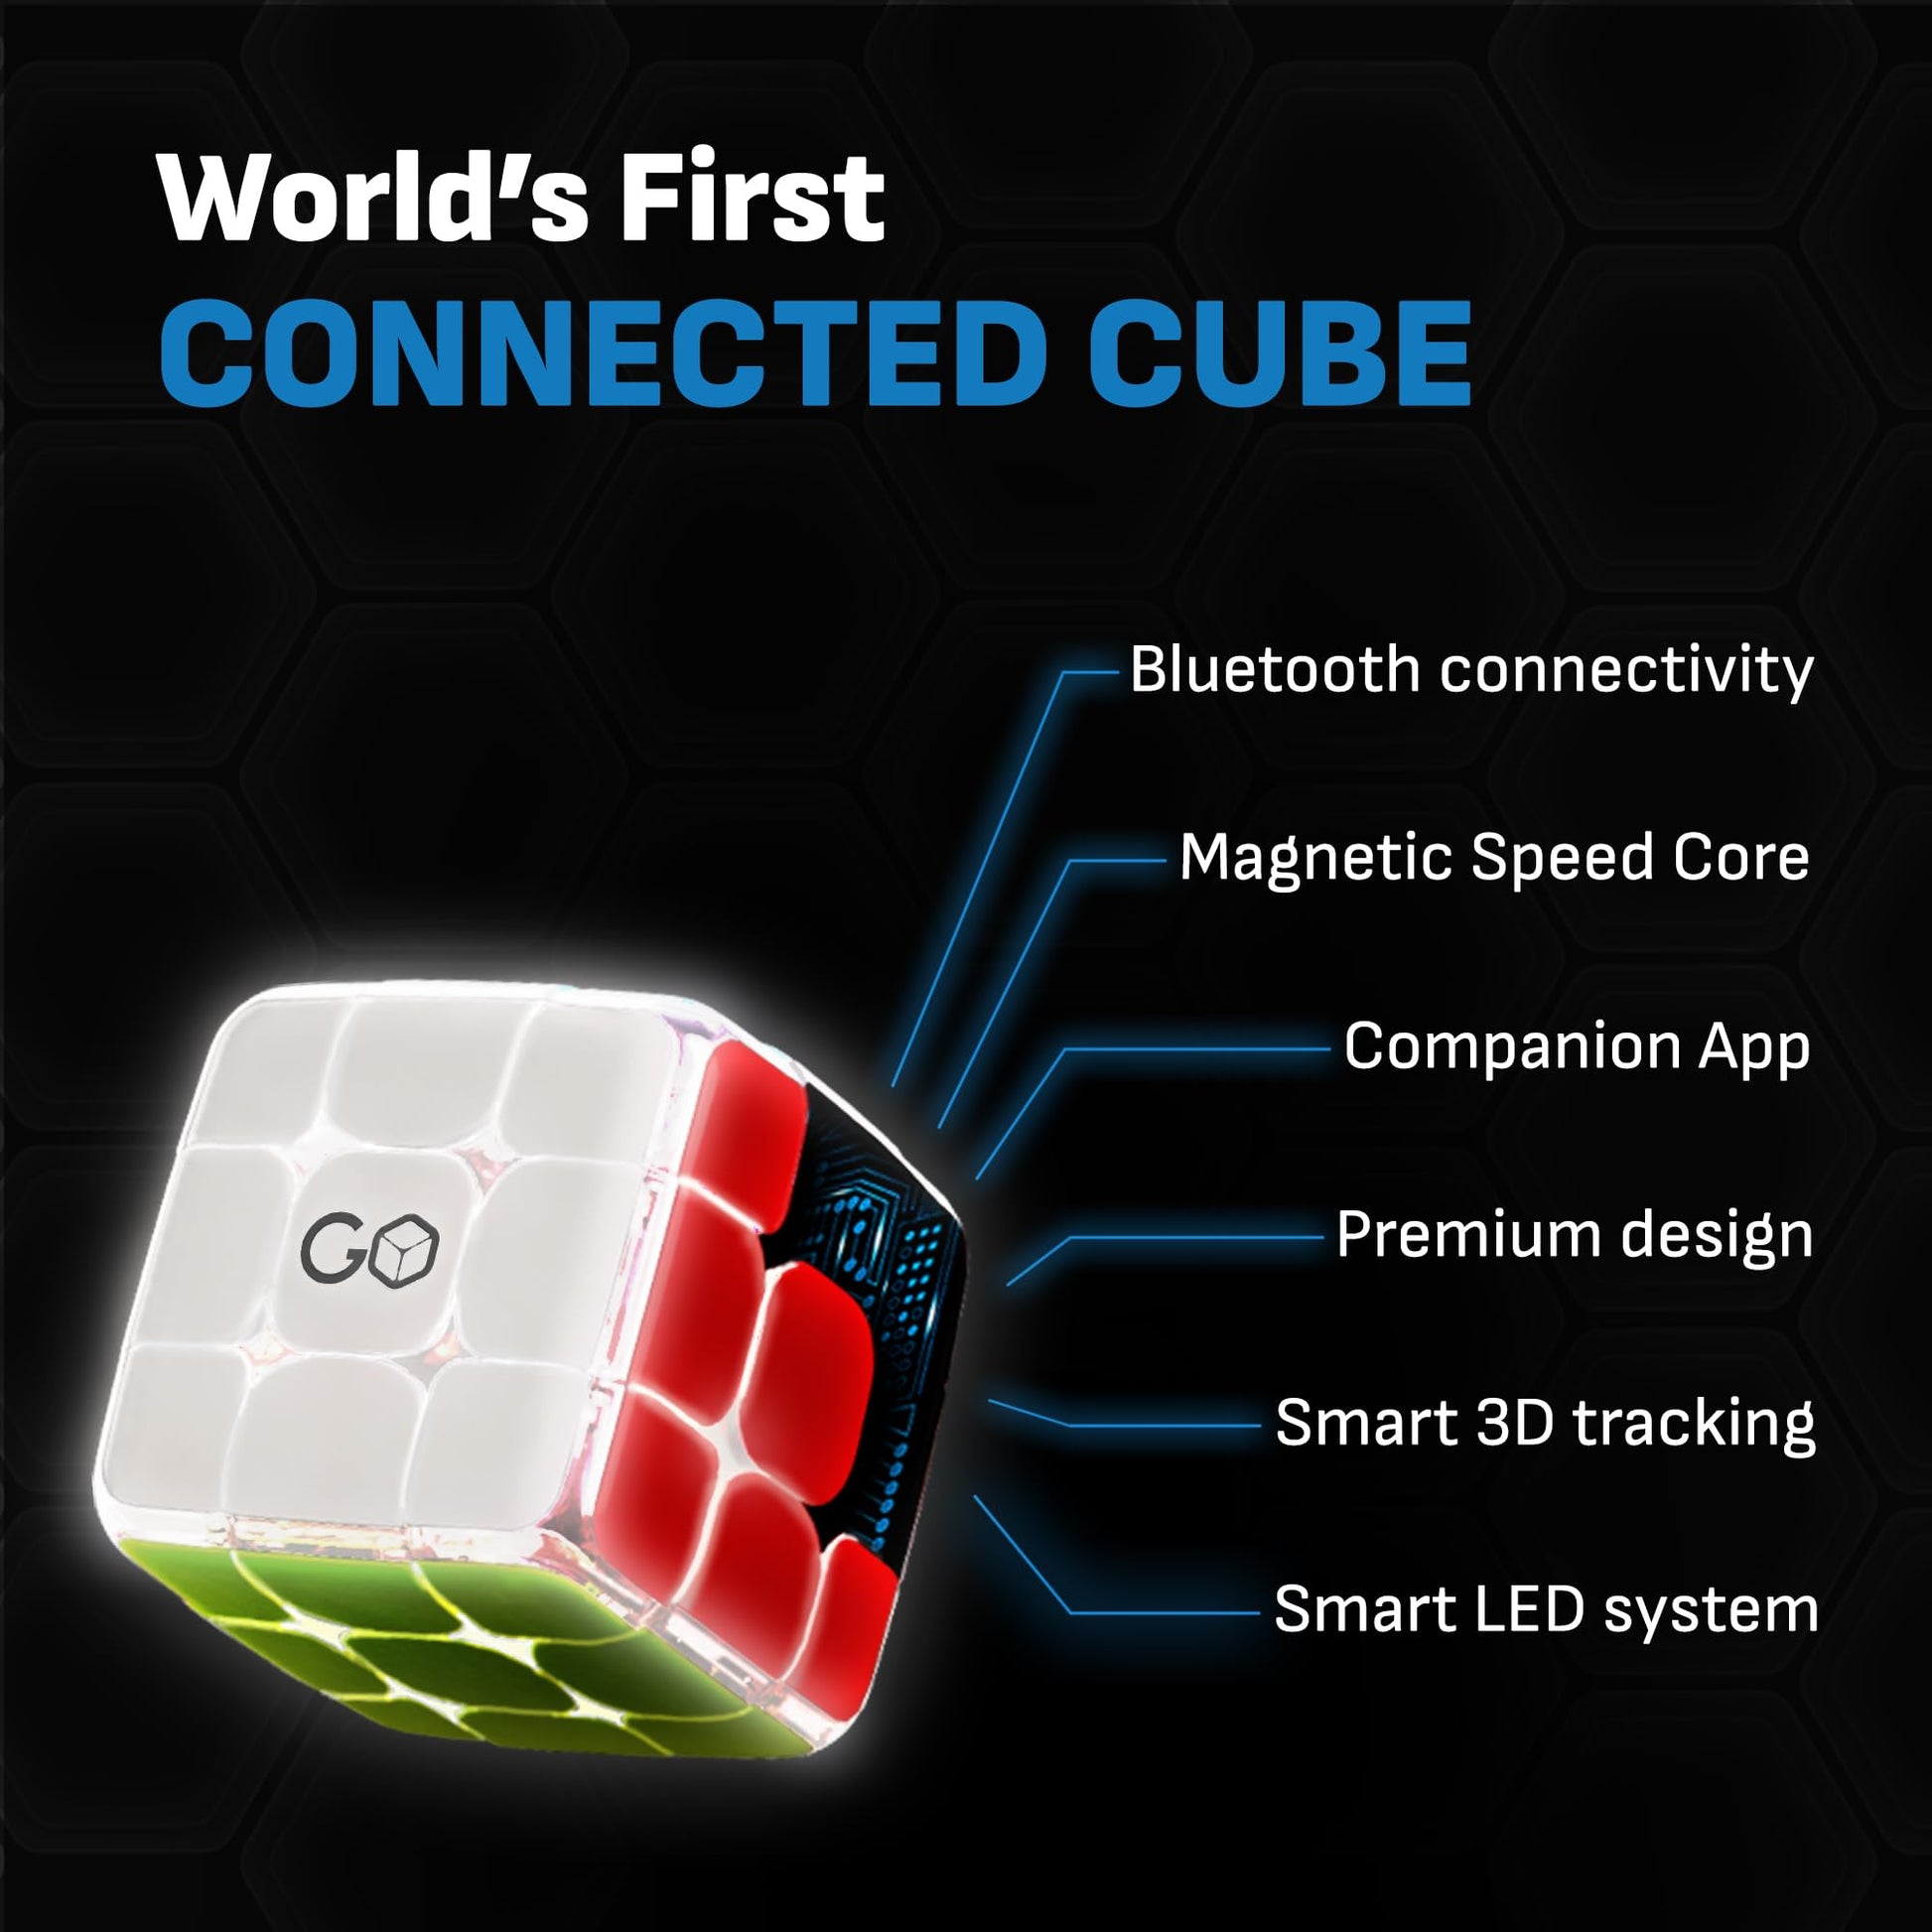 GoCube Bluetooth Connected 3x3 Smart Cube | Learn To Solve the Cube in 1 Hour | Free App with Lessons, Games, Competitions for Kids and Adults | Stickerless Magnetic Speed Interactive Cube STEM Puzzle - amzGamess